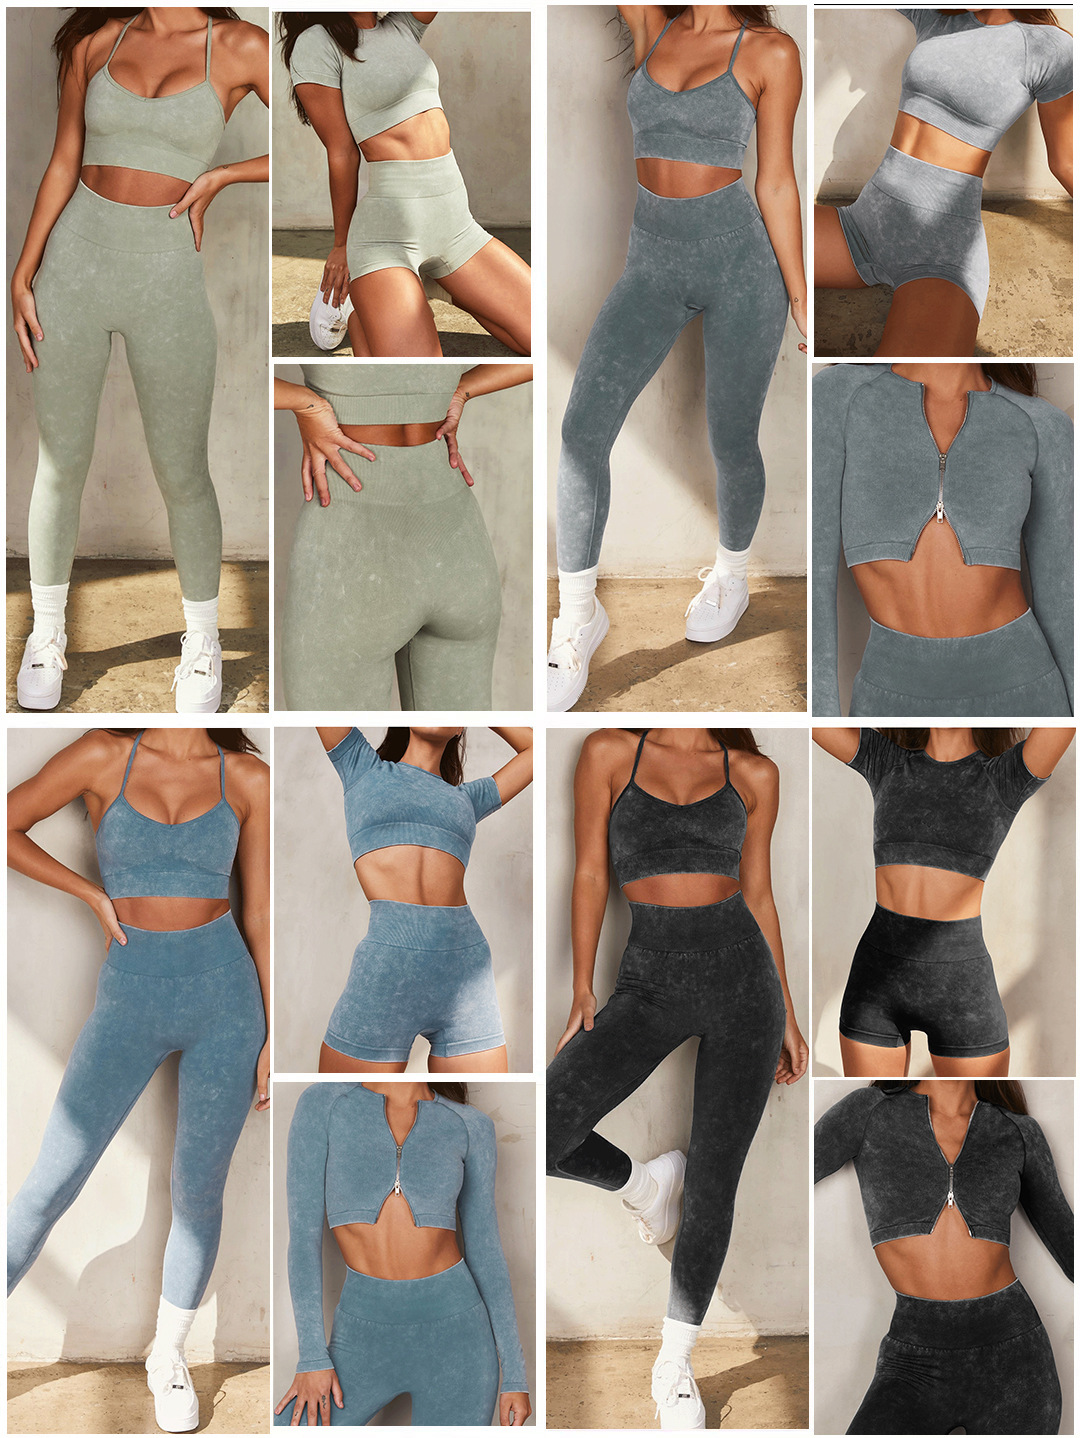 Spot Cross-border European And American New Sand-washed Seamless Body Yoga Clothes Women's Sling Bra Running Trousers Five-piece Suit